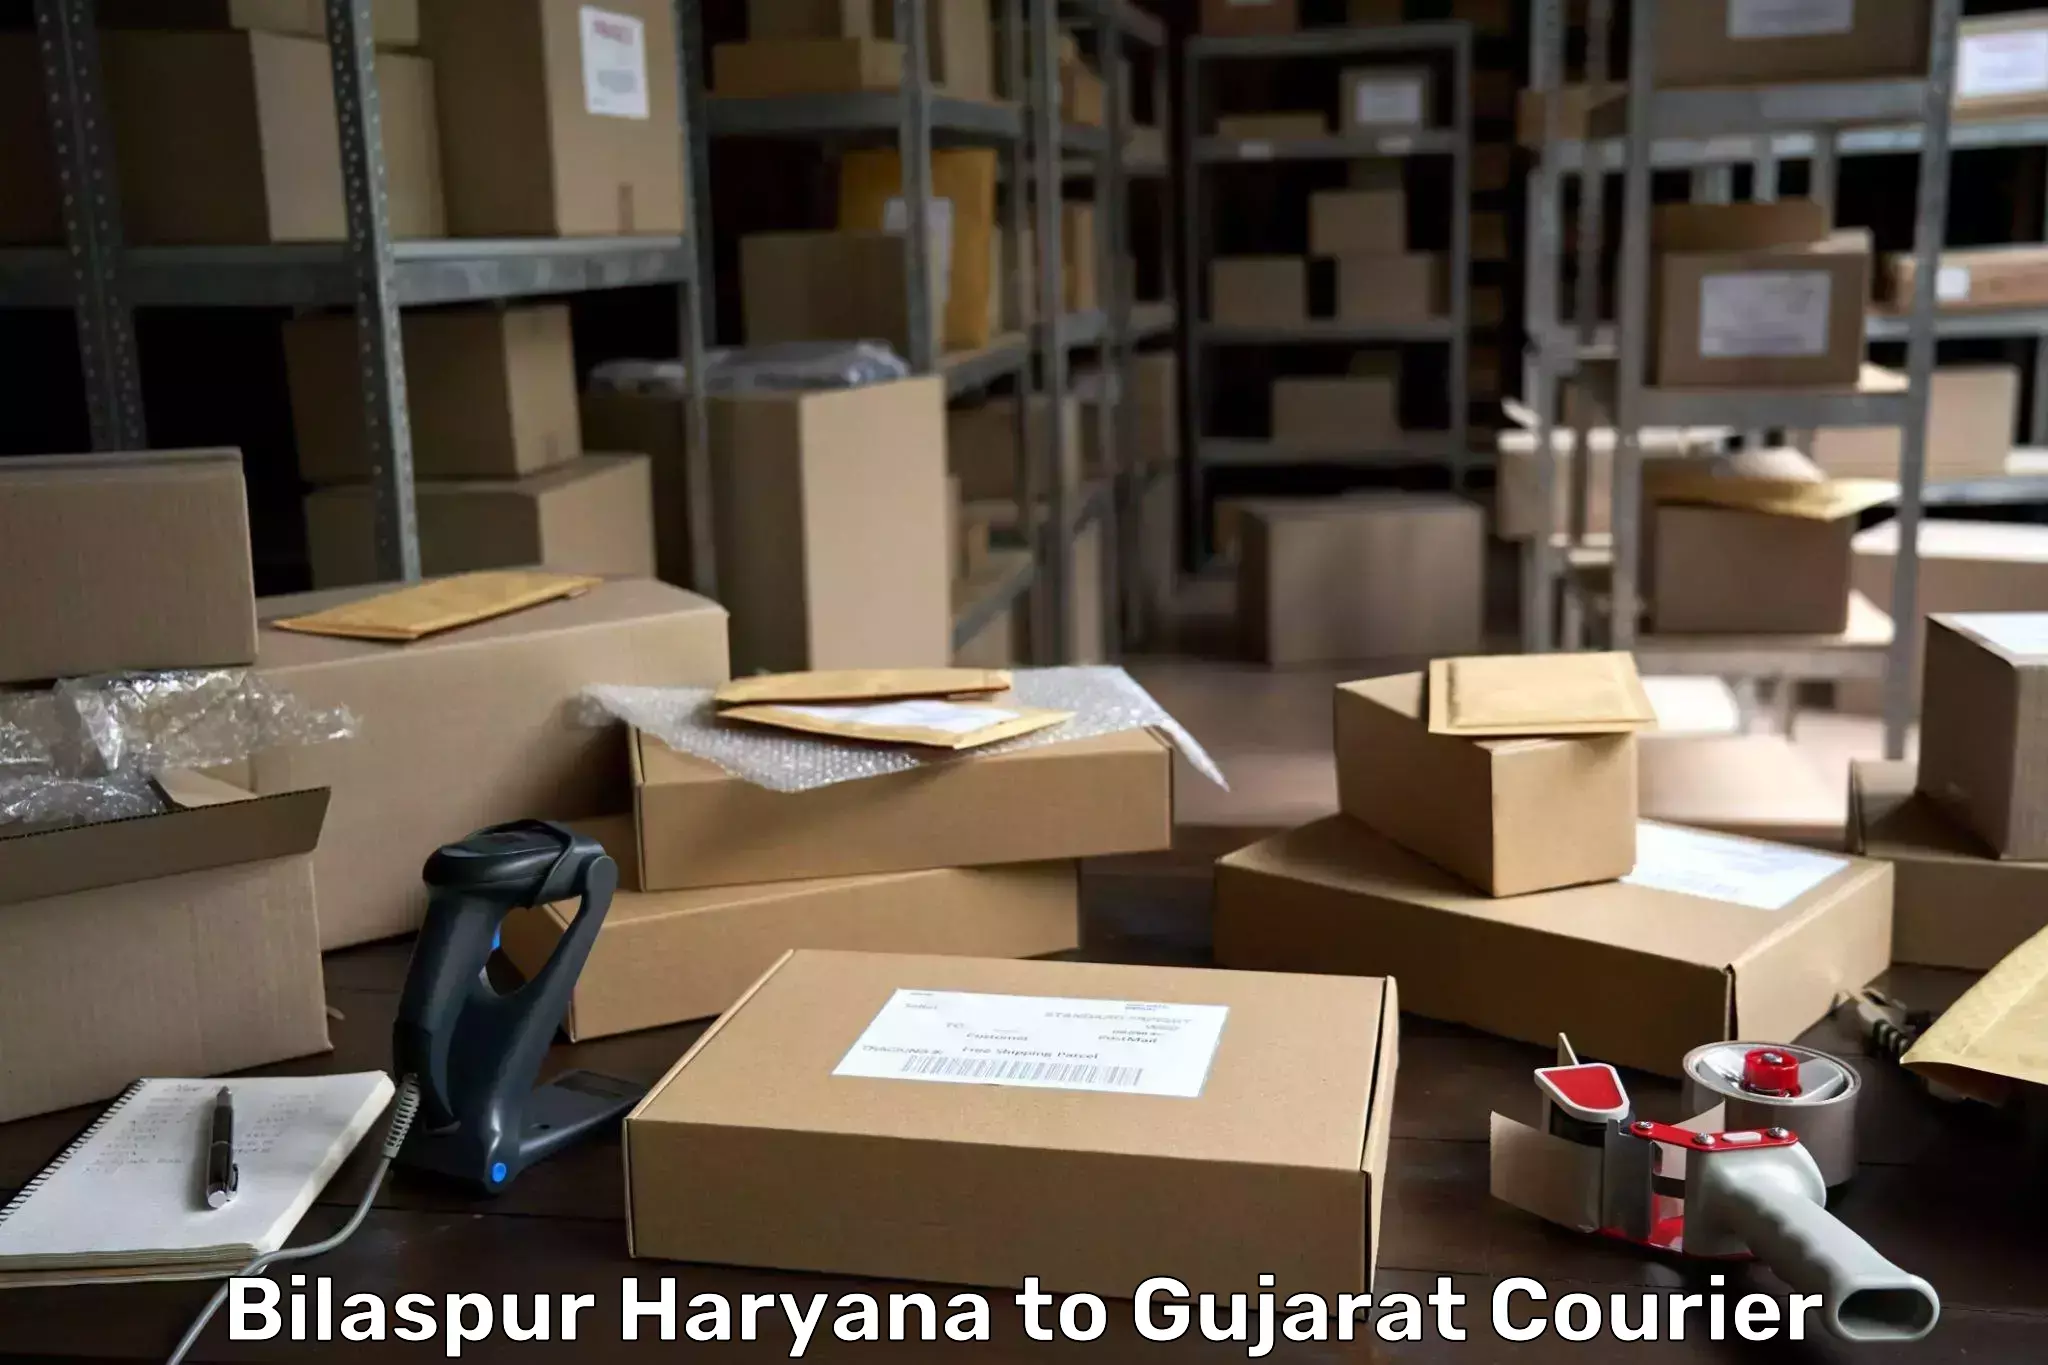 Next-day delivery options Bilaspur Haryana to Gujarat